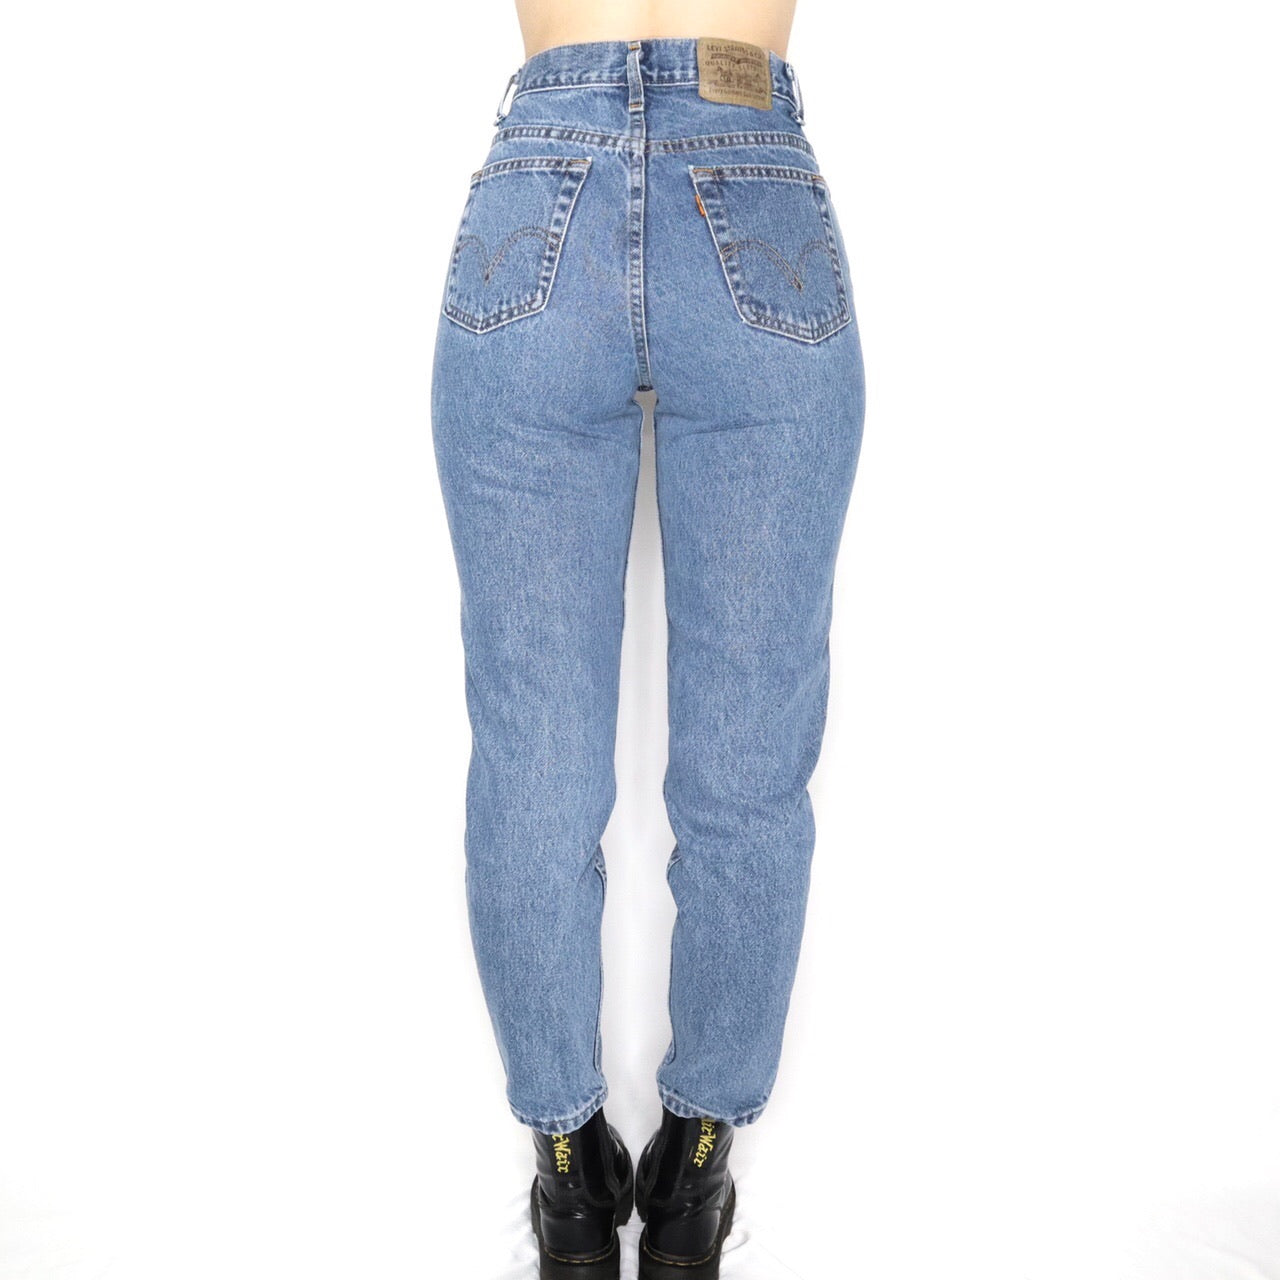 Vintage Late 90s High Waisted Levis Jeans